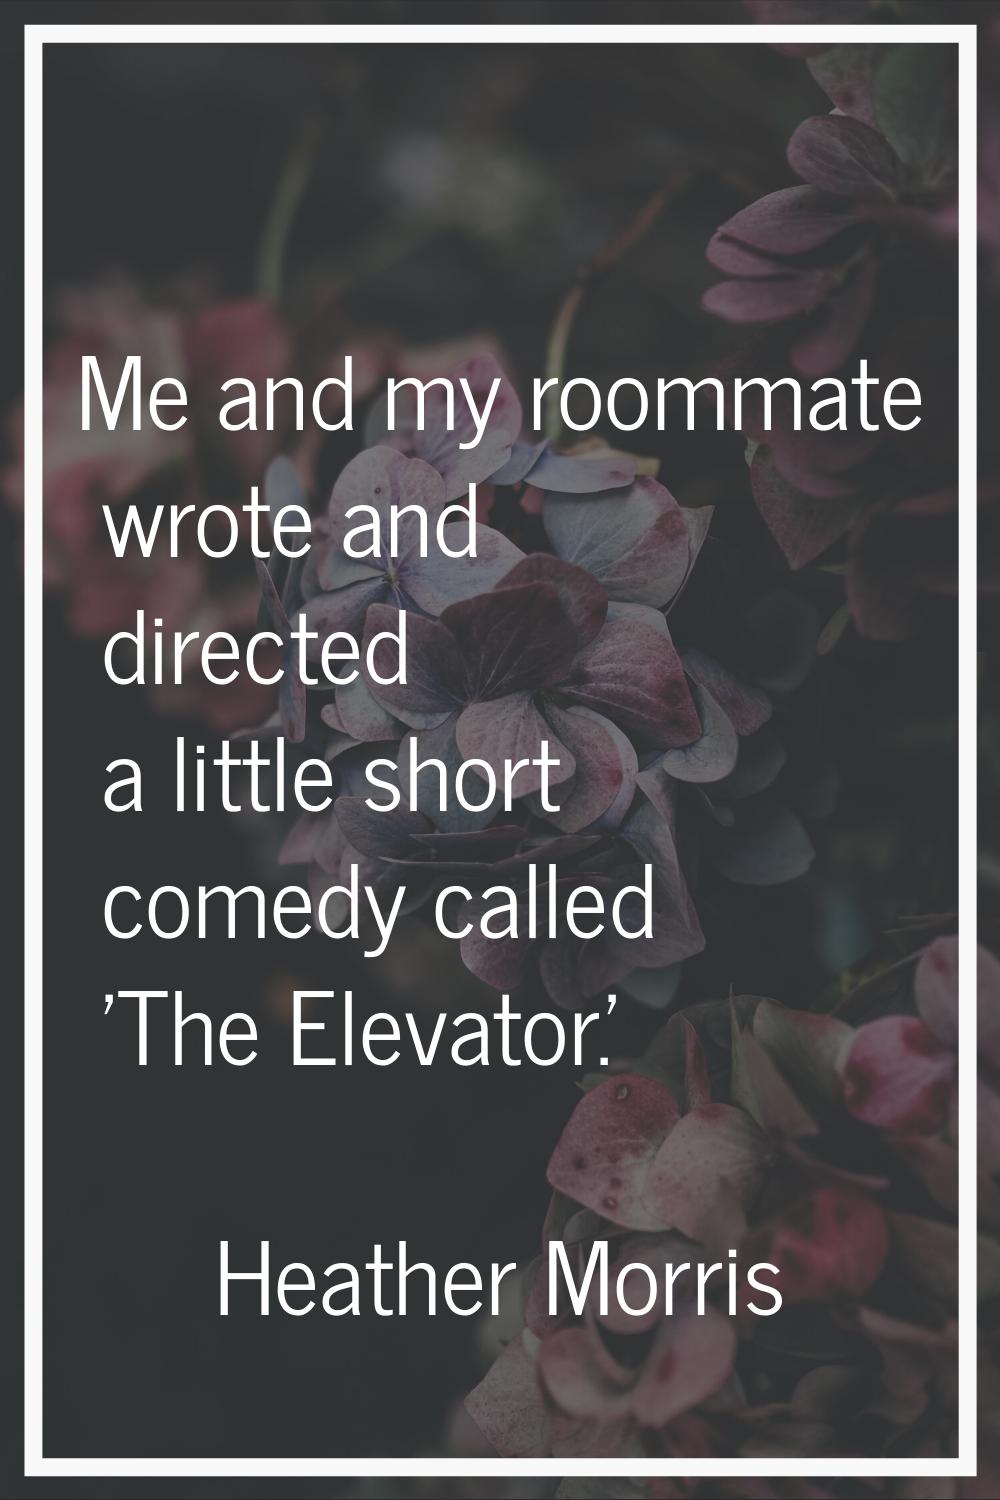 Me and my roommate wrote and directed a little short comedy called 'The Elevator.'